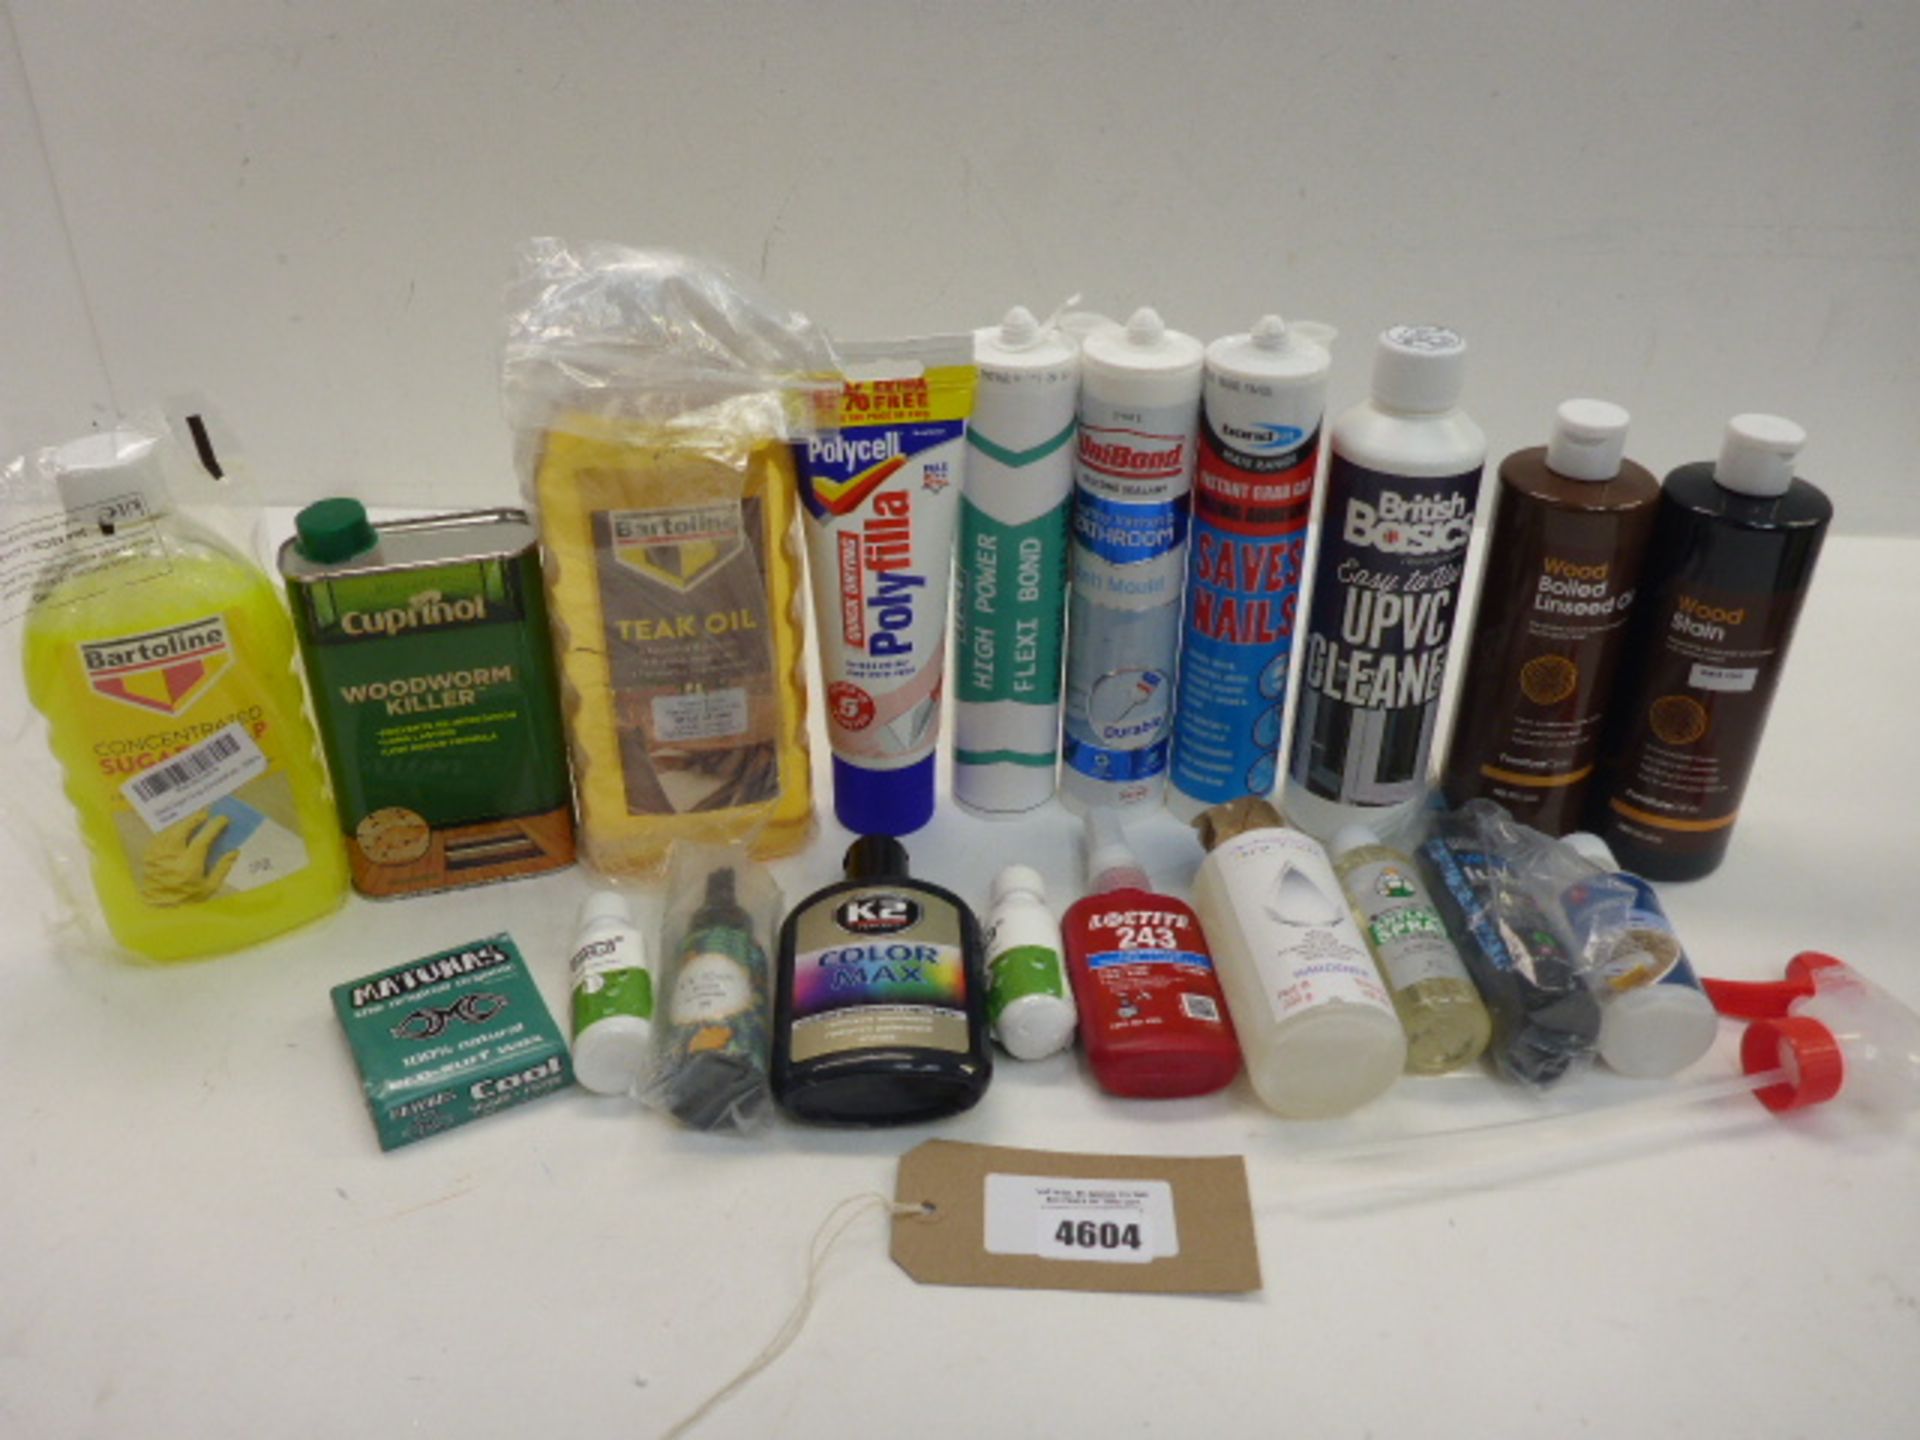 Polyfilla, Flixi bond, Anti mould, woodworm killer, teak oil, wood stain, sugar soap and other DIY